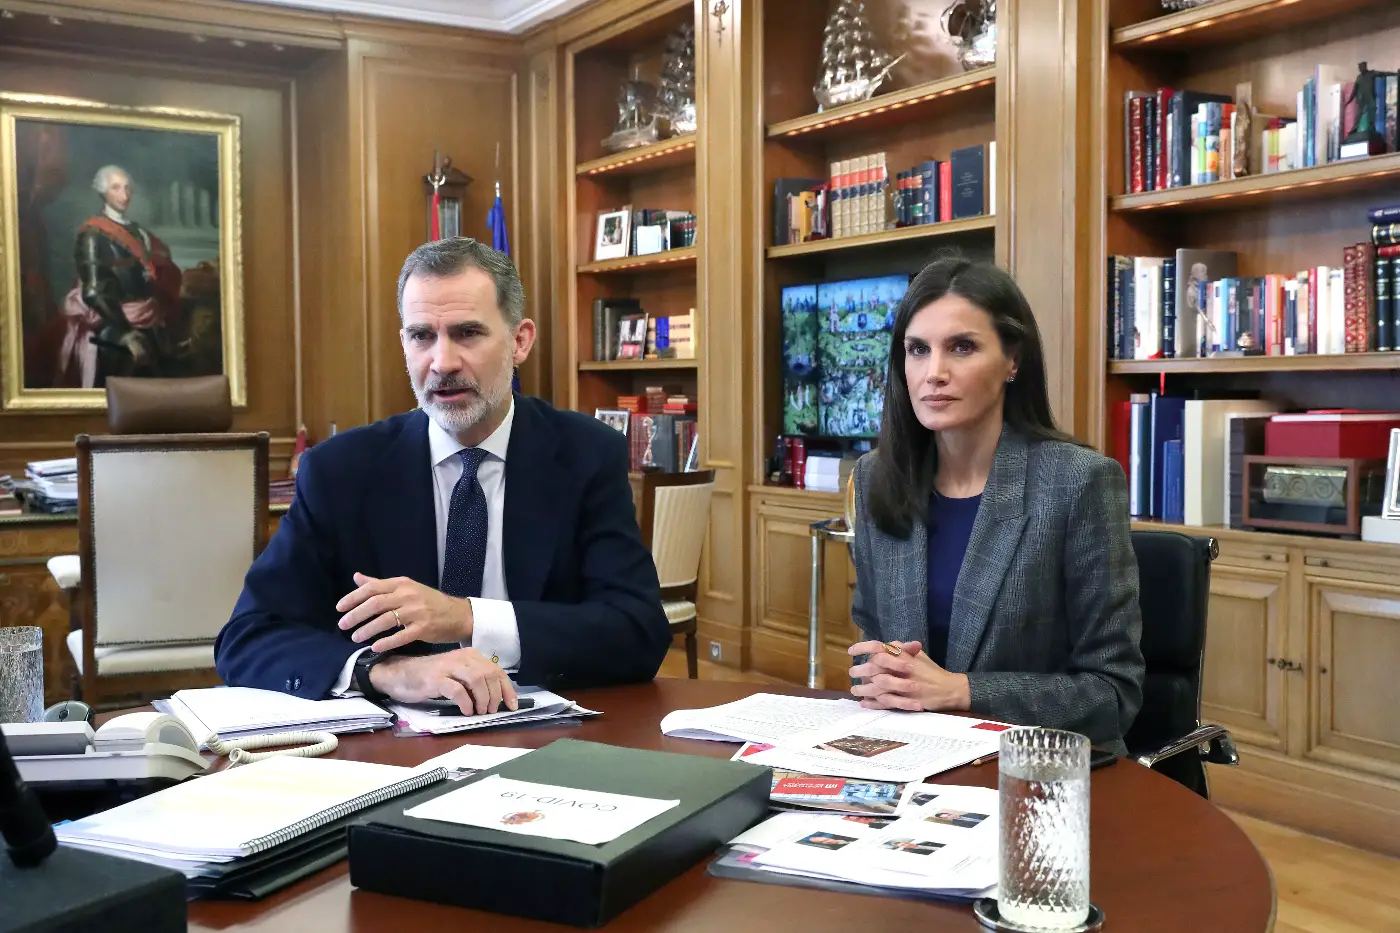 King Felipe and Queen Letizia talked to the representatives of hospitality sector